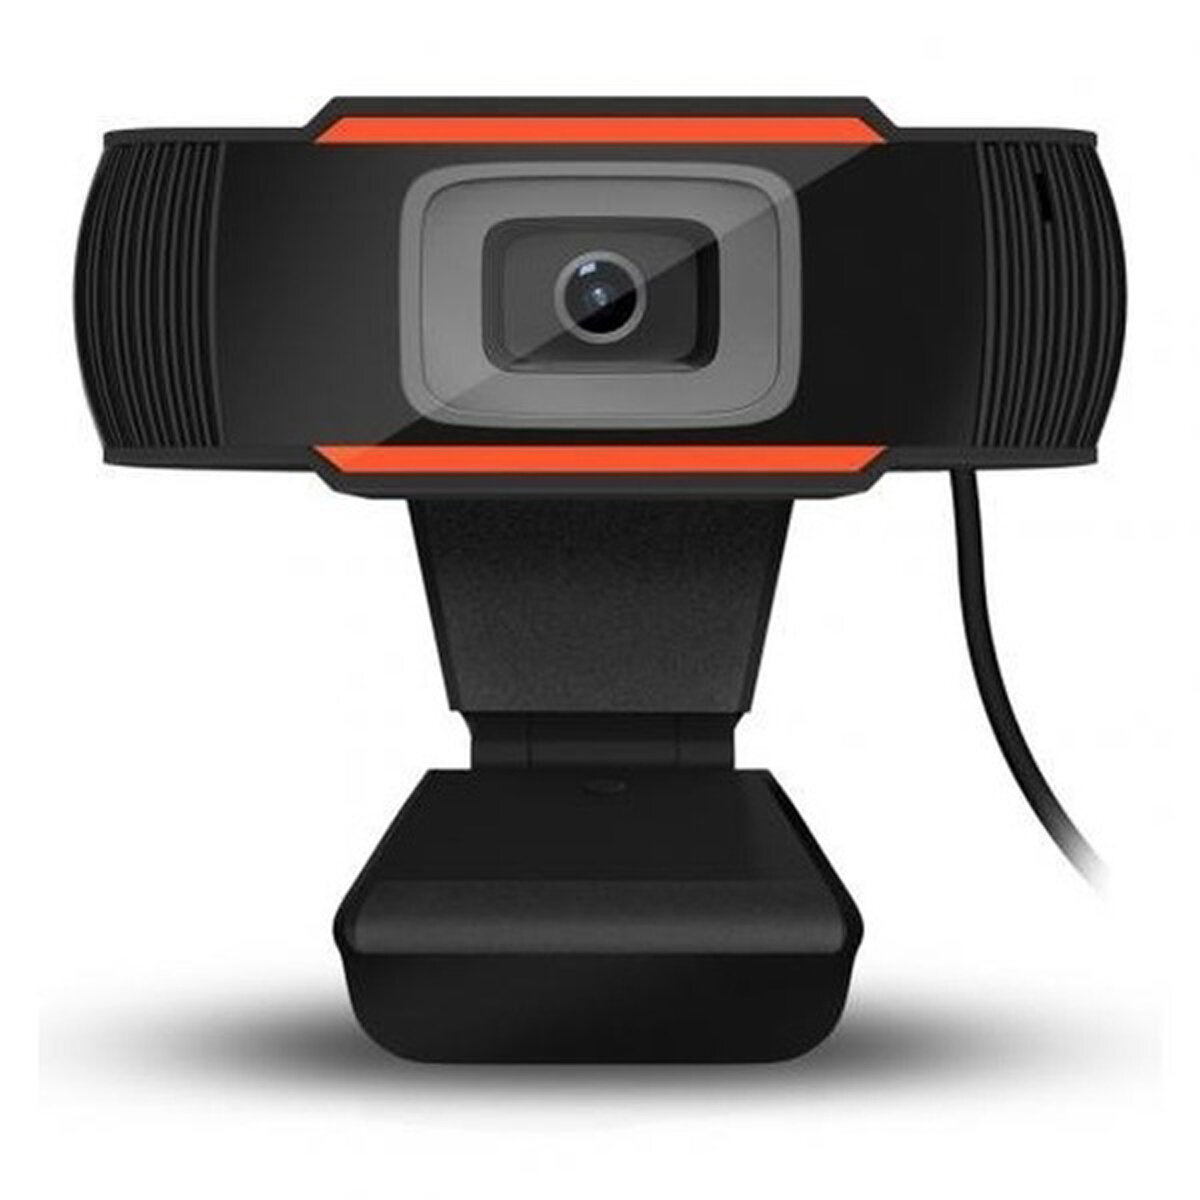 HD Webcam Auto Focus PC Web USB Camera Video Conference Cams with Microphone